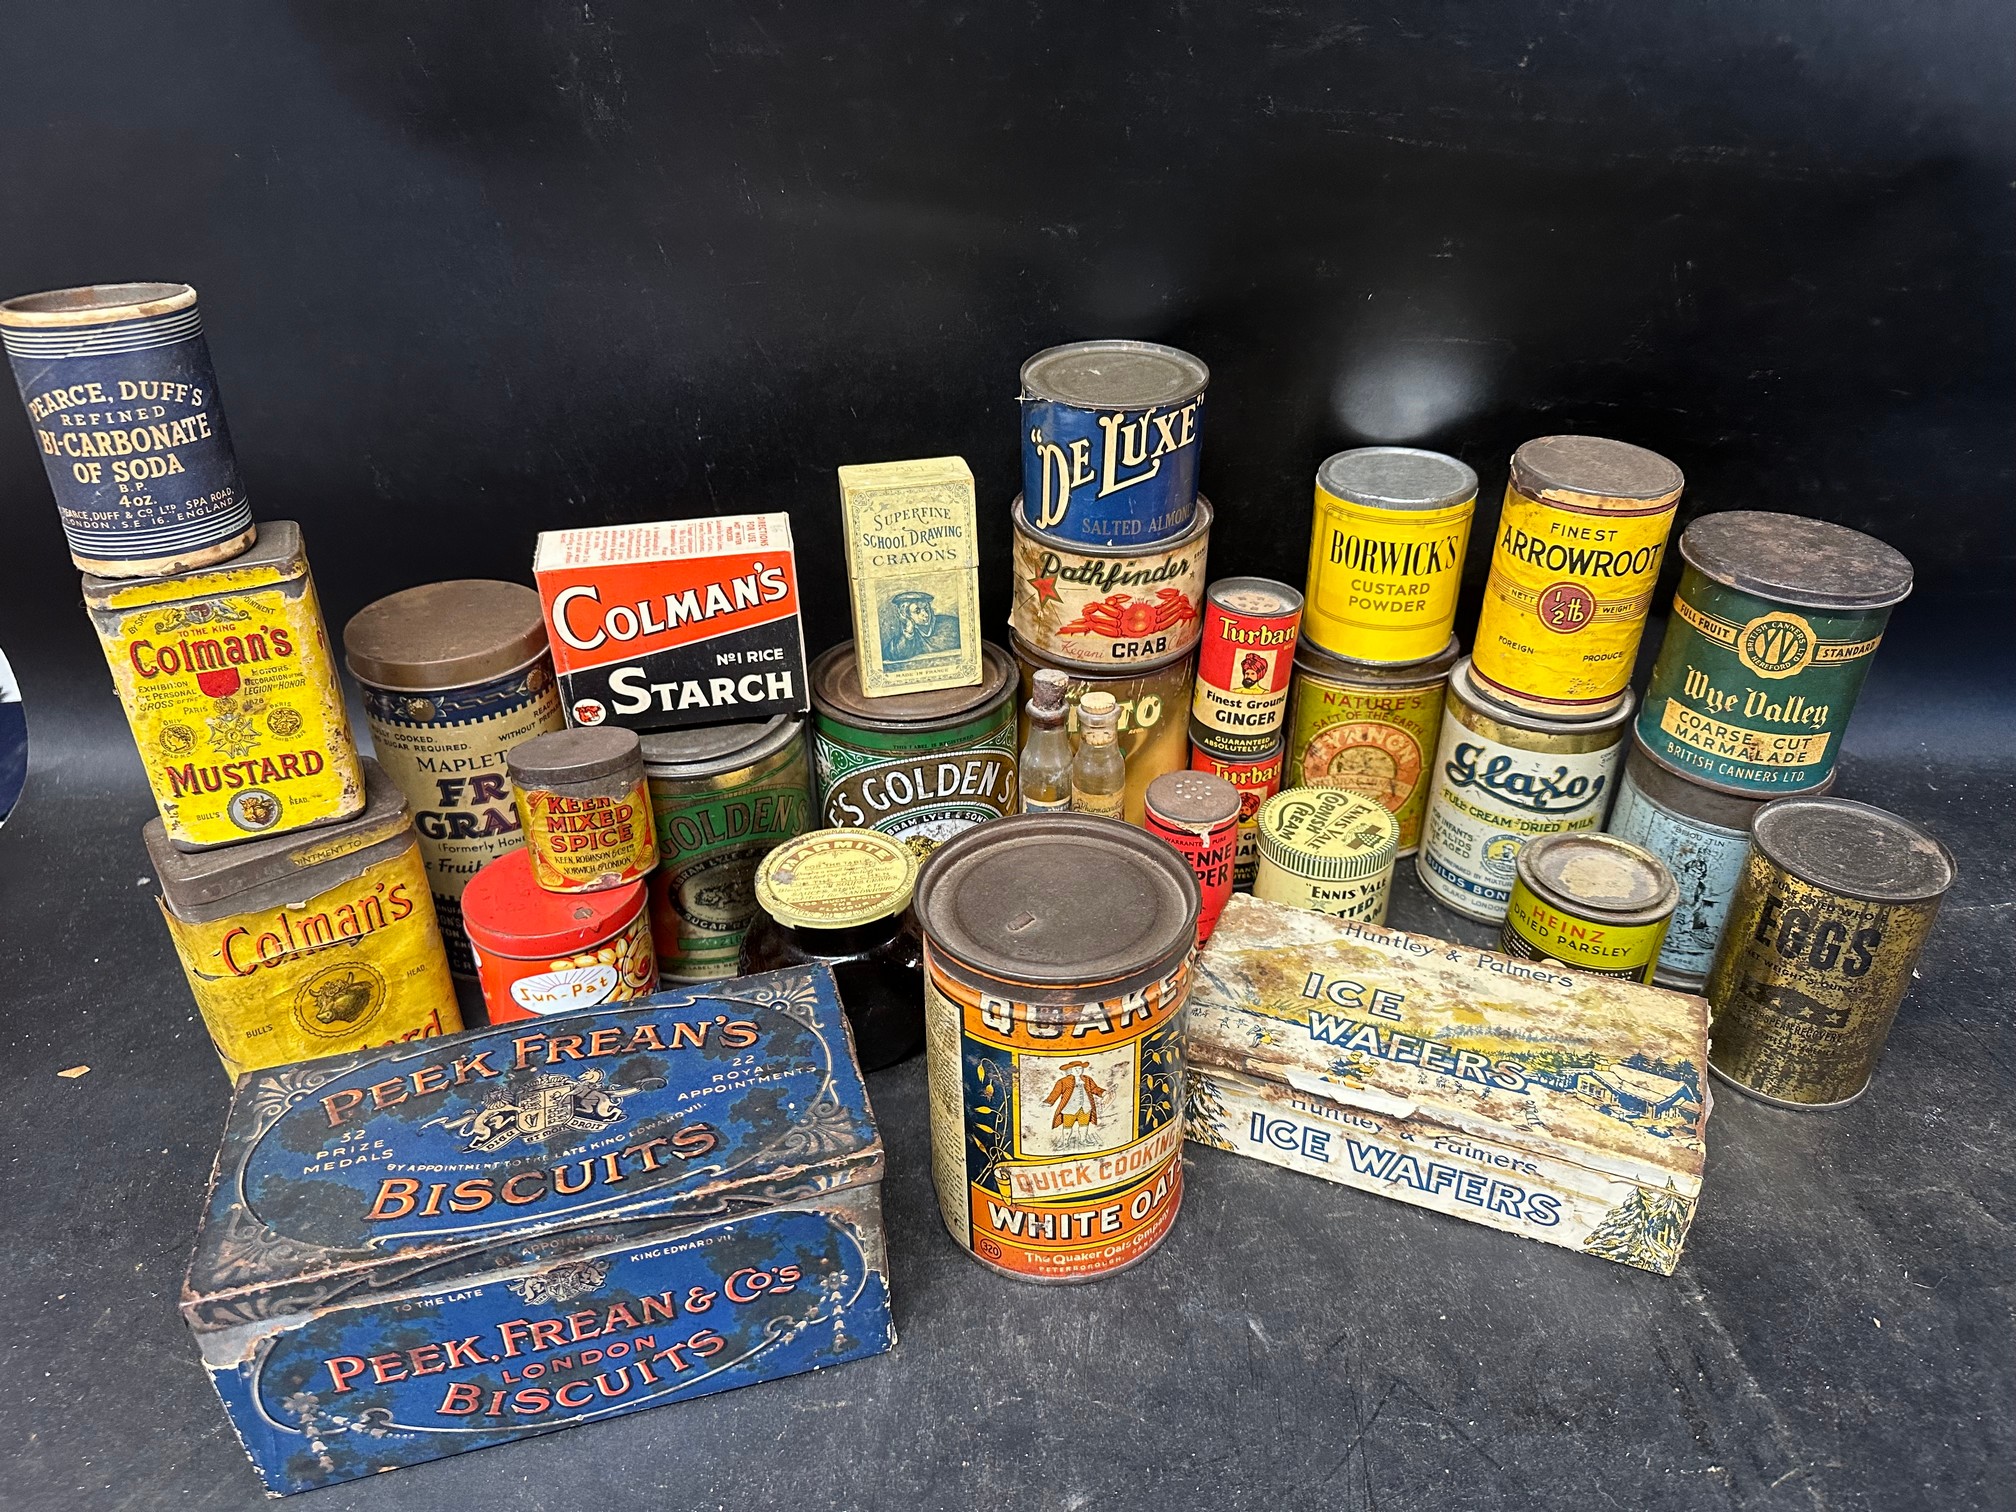 A selection of early food packaging (many with contents) inc. Peek Frean's Biscuits, Quaker White